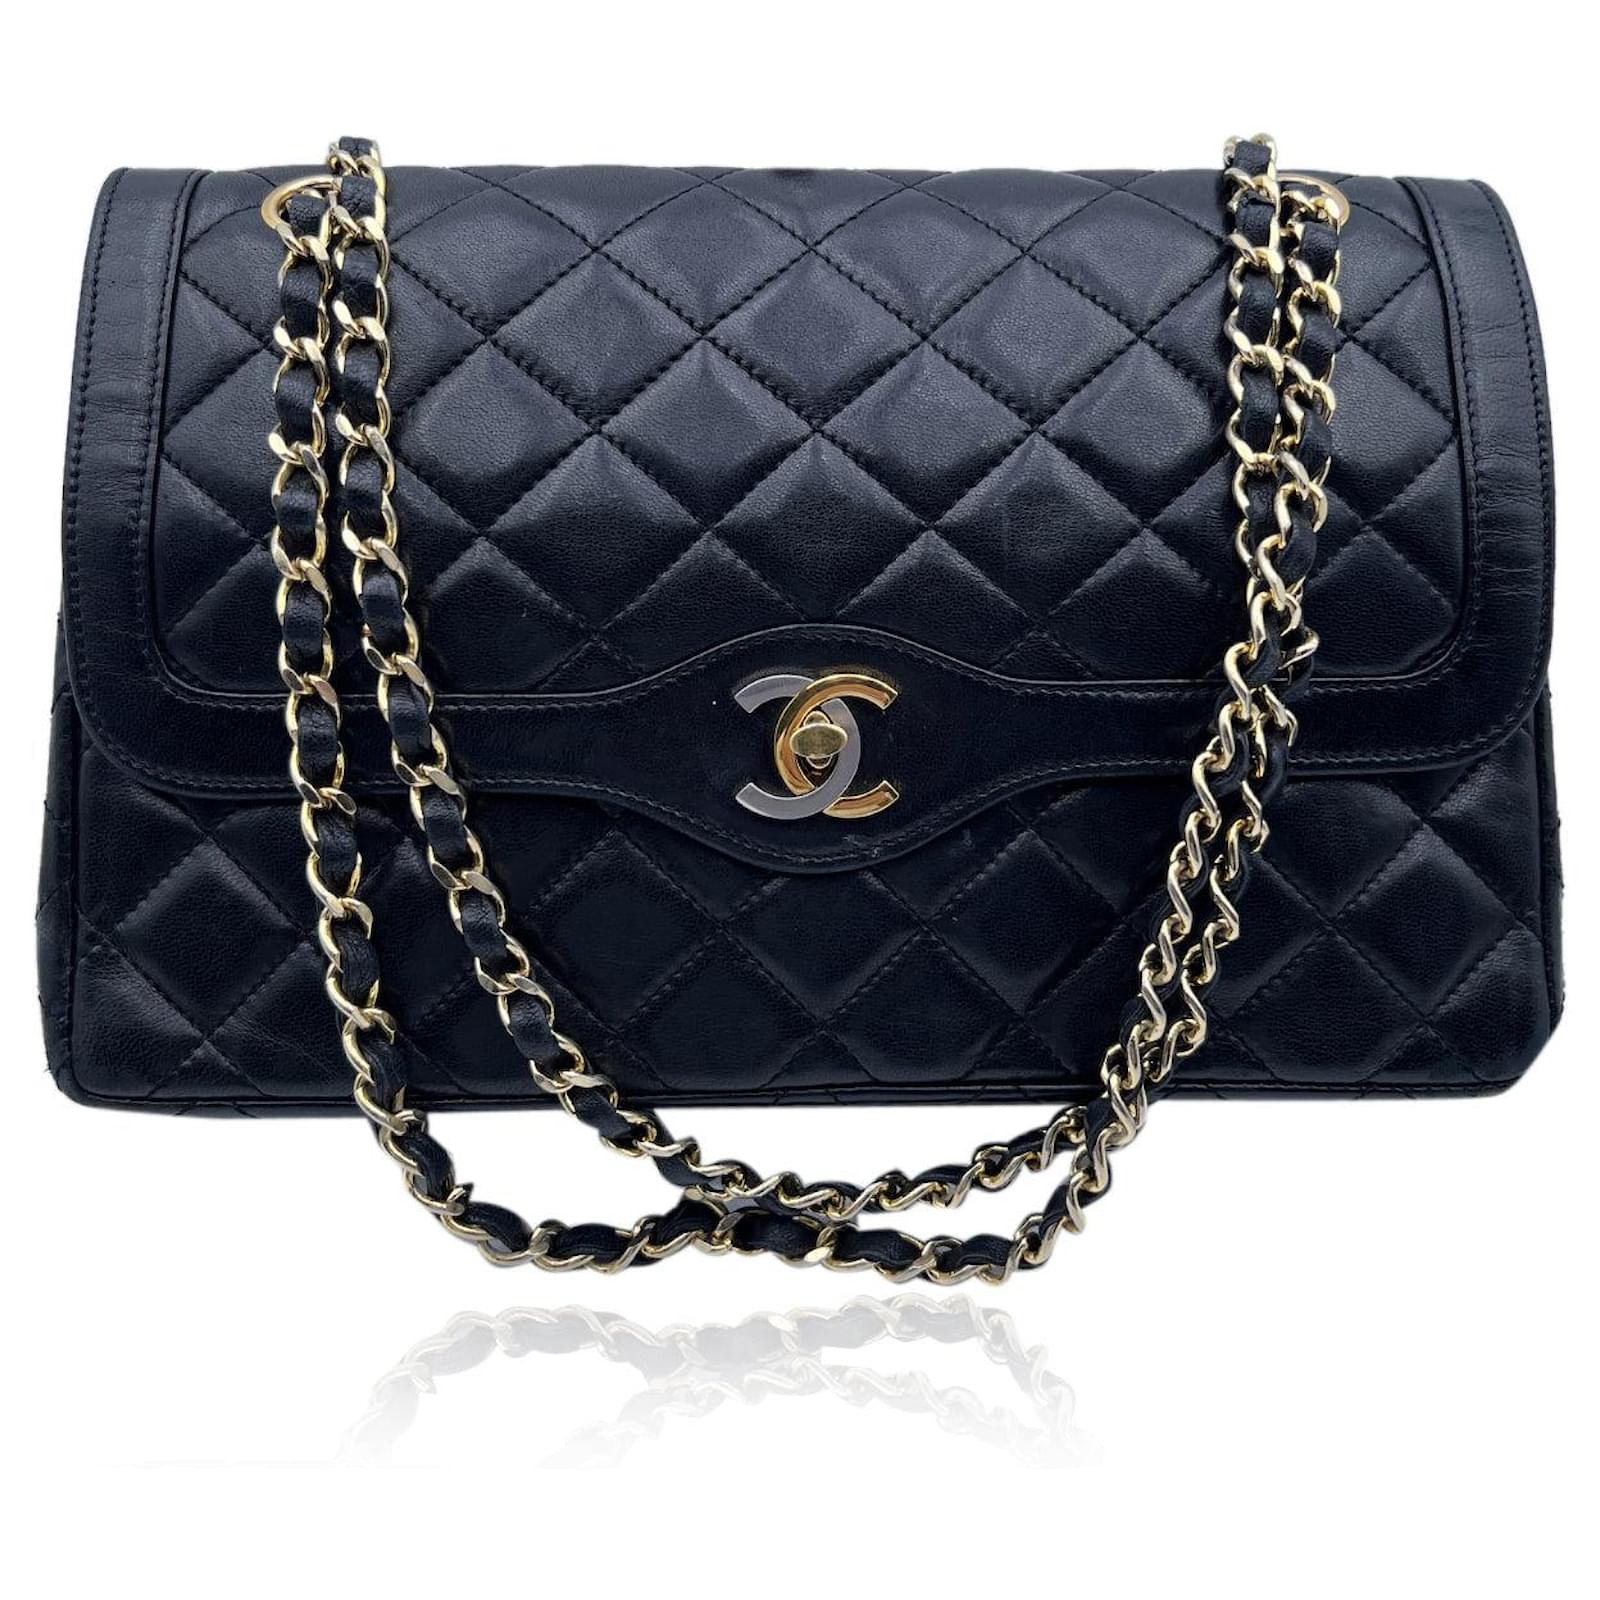 Chanel Vintage Quilted Leather Smooth Trim Timeless Double Flap